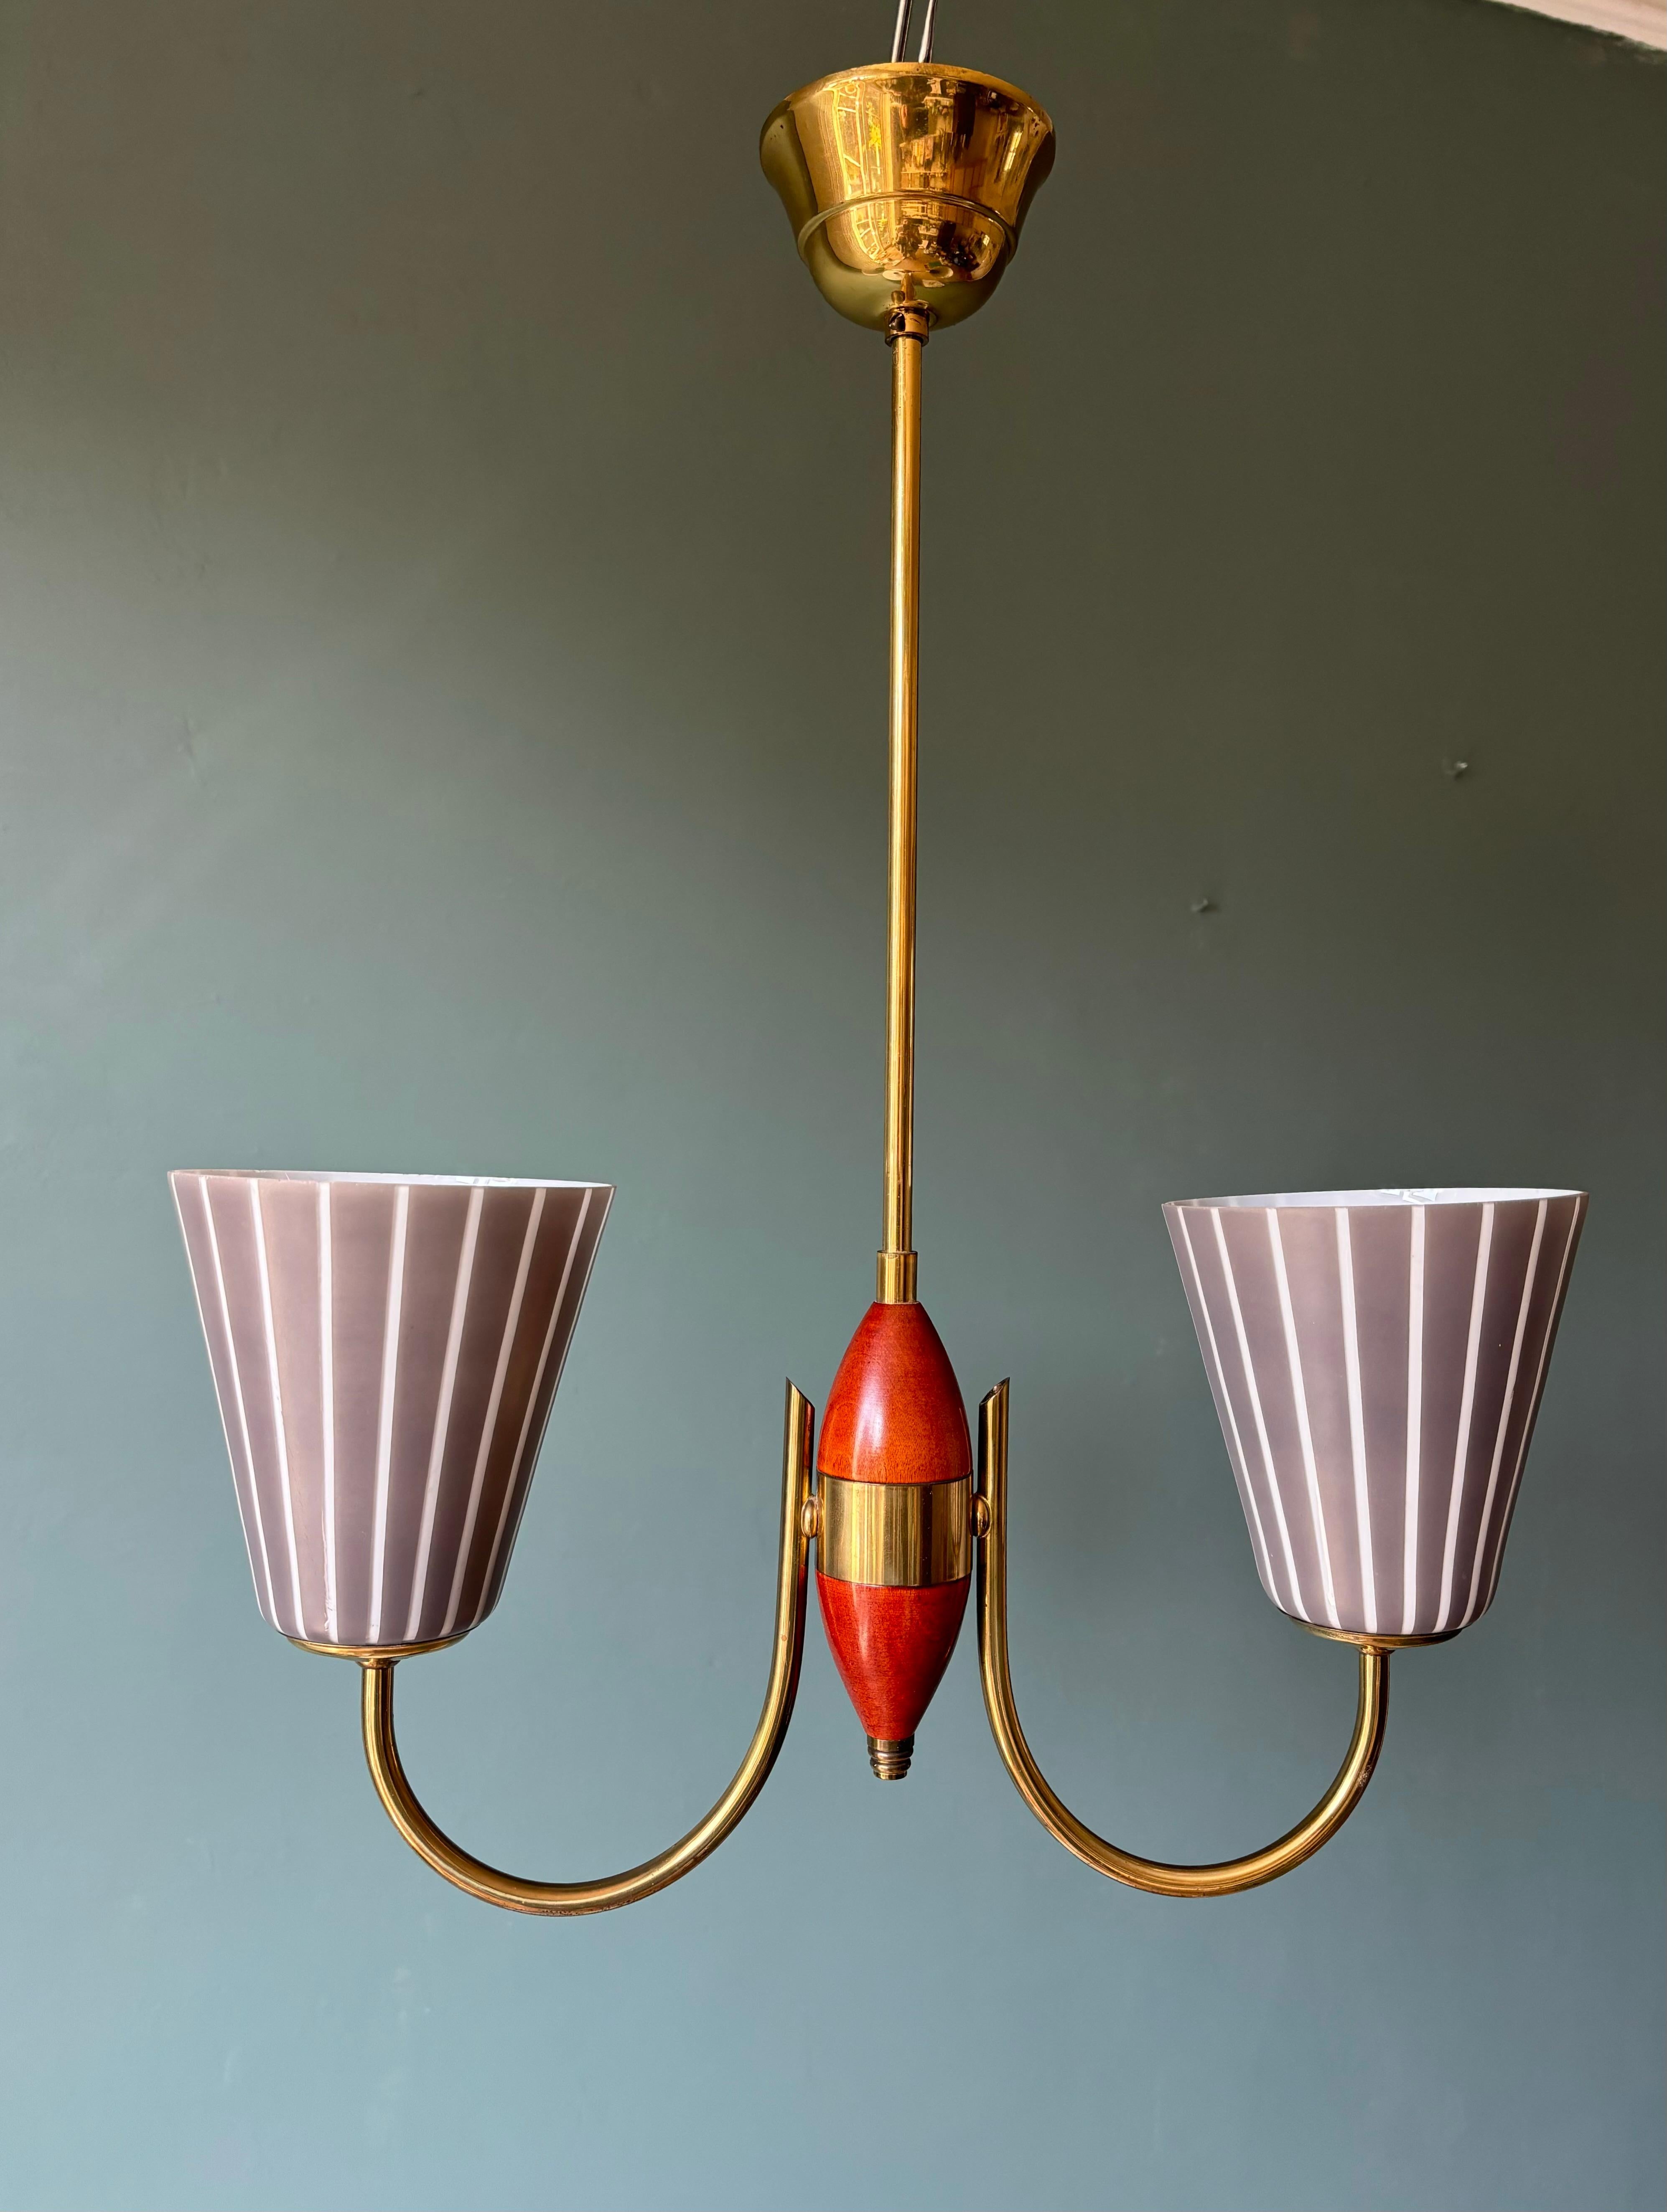 Striking early midcentury two headed striped cone art glass chandelier by Swedish glass company Orrefors. This model is attributed to designer Nils Landberg (1907-1991) who created striped glass shades for Orrefors in the late 1940s. 

This elegant